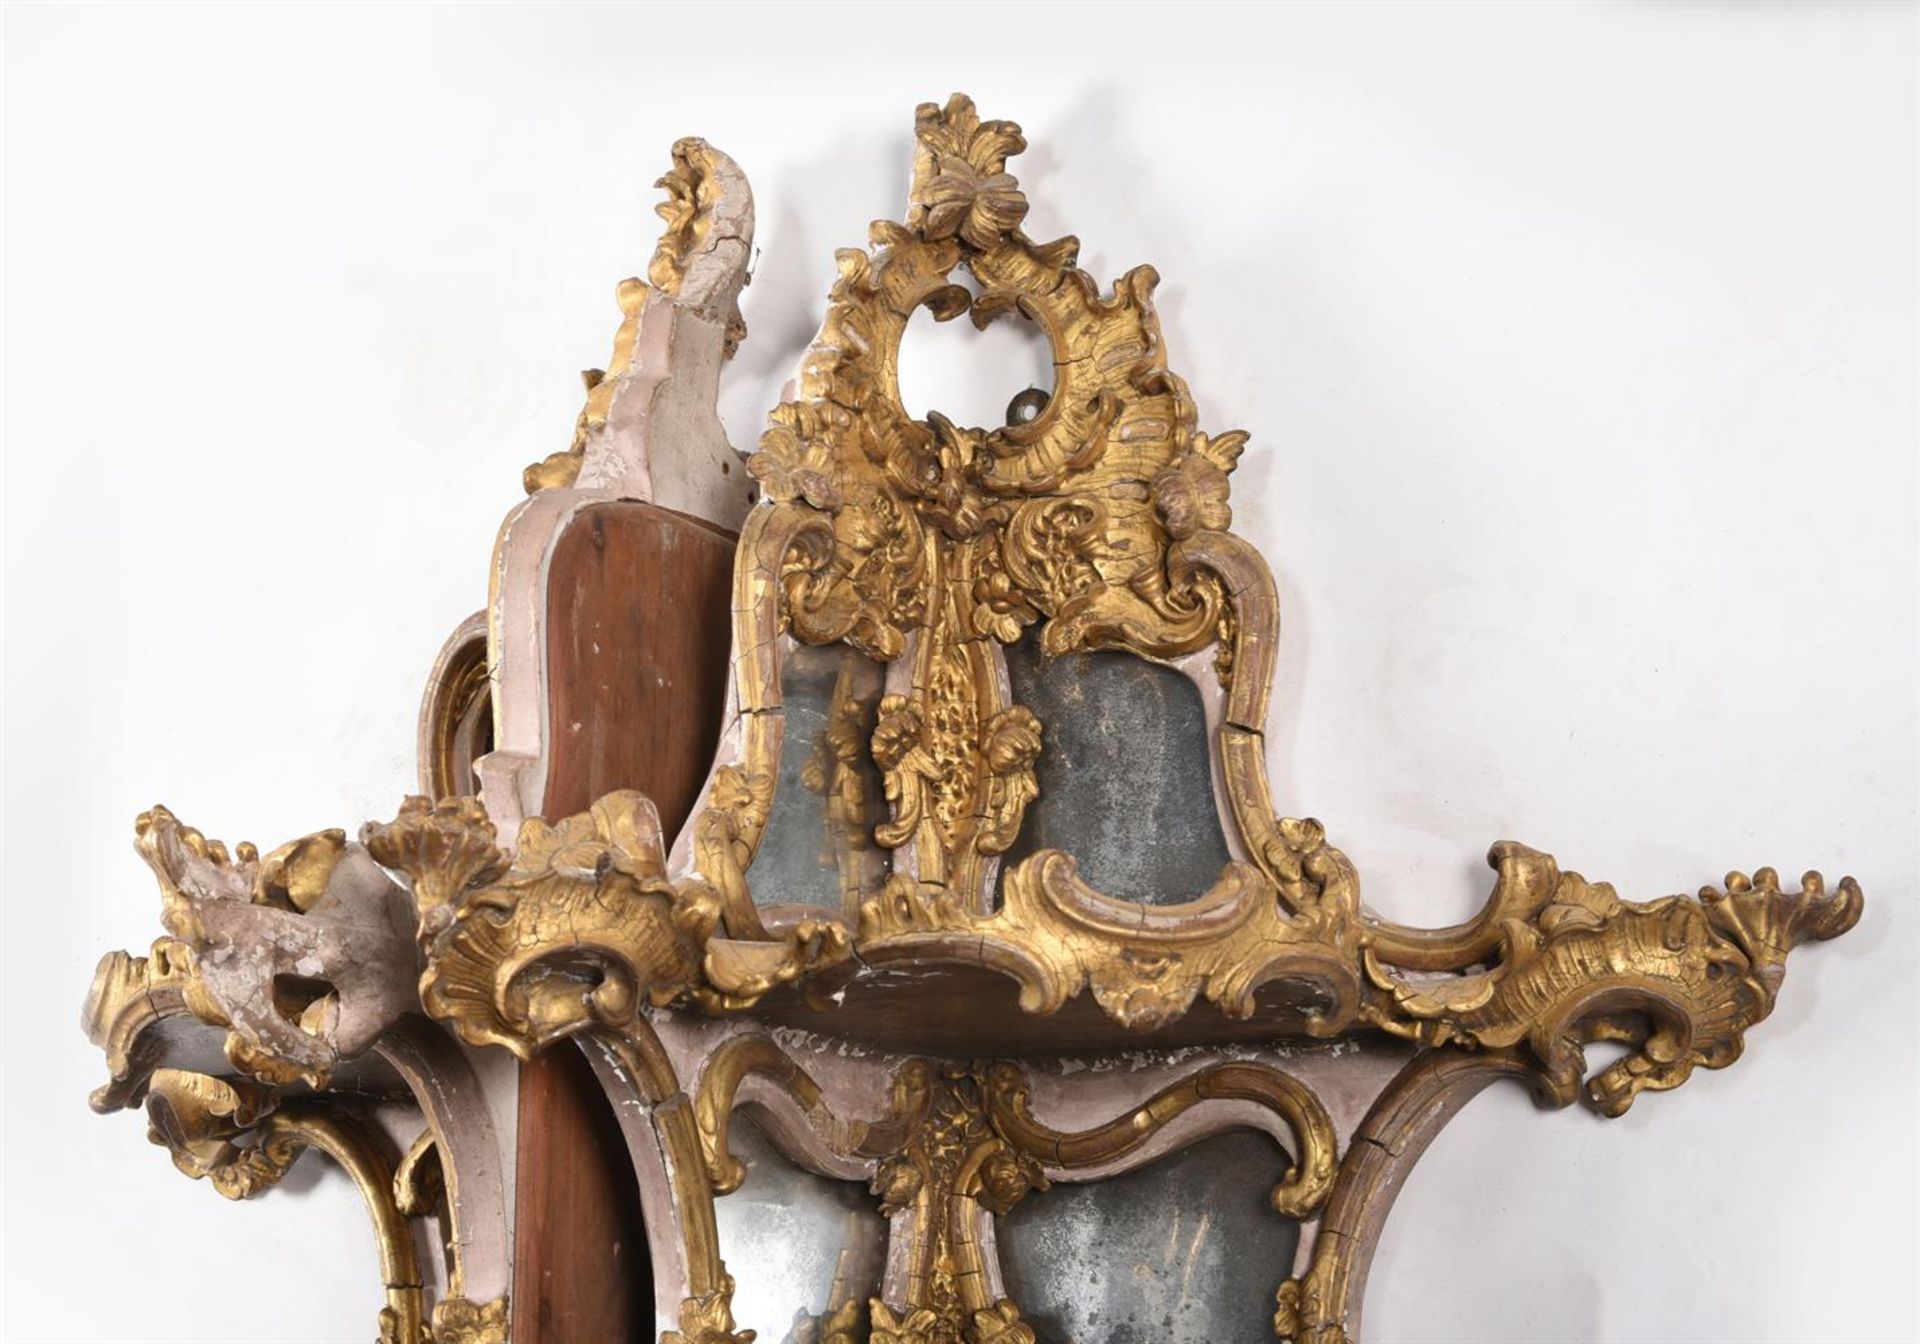 A PAIR OF GILTWOOD AND COMPOSITION CORNER WALL SHELVES IN ROCOCO STYLE - Image 3 of 3